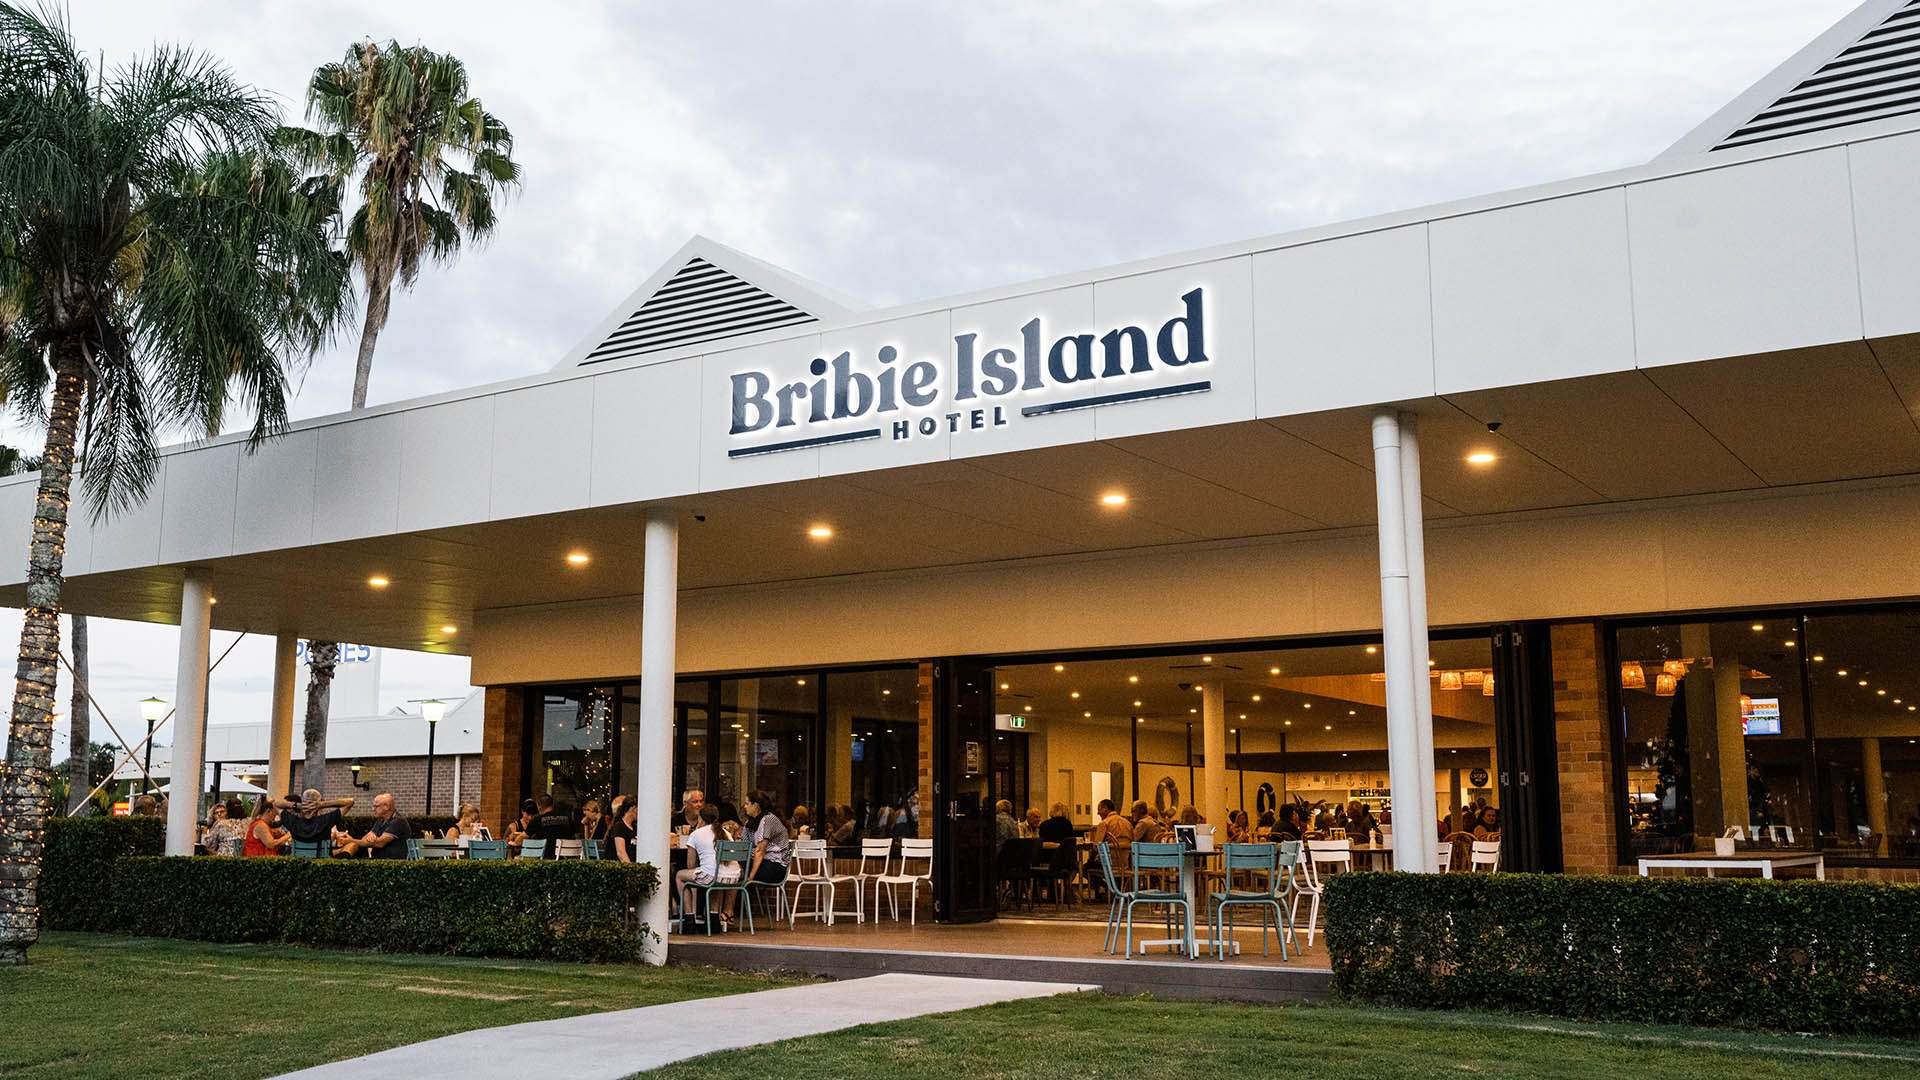 Bribie Island Hotel Has Reopened with a Big Fairy Light-Lit Beer Garden After a $2.2 Million Revamp